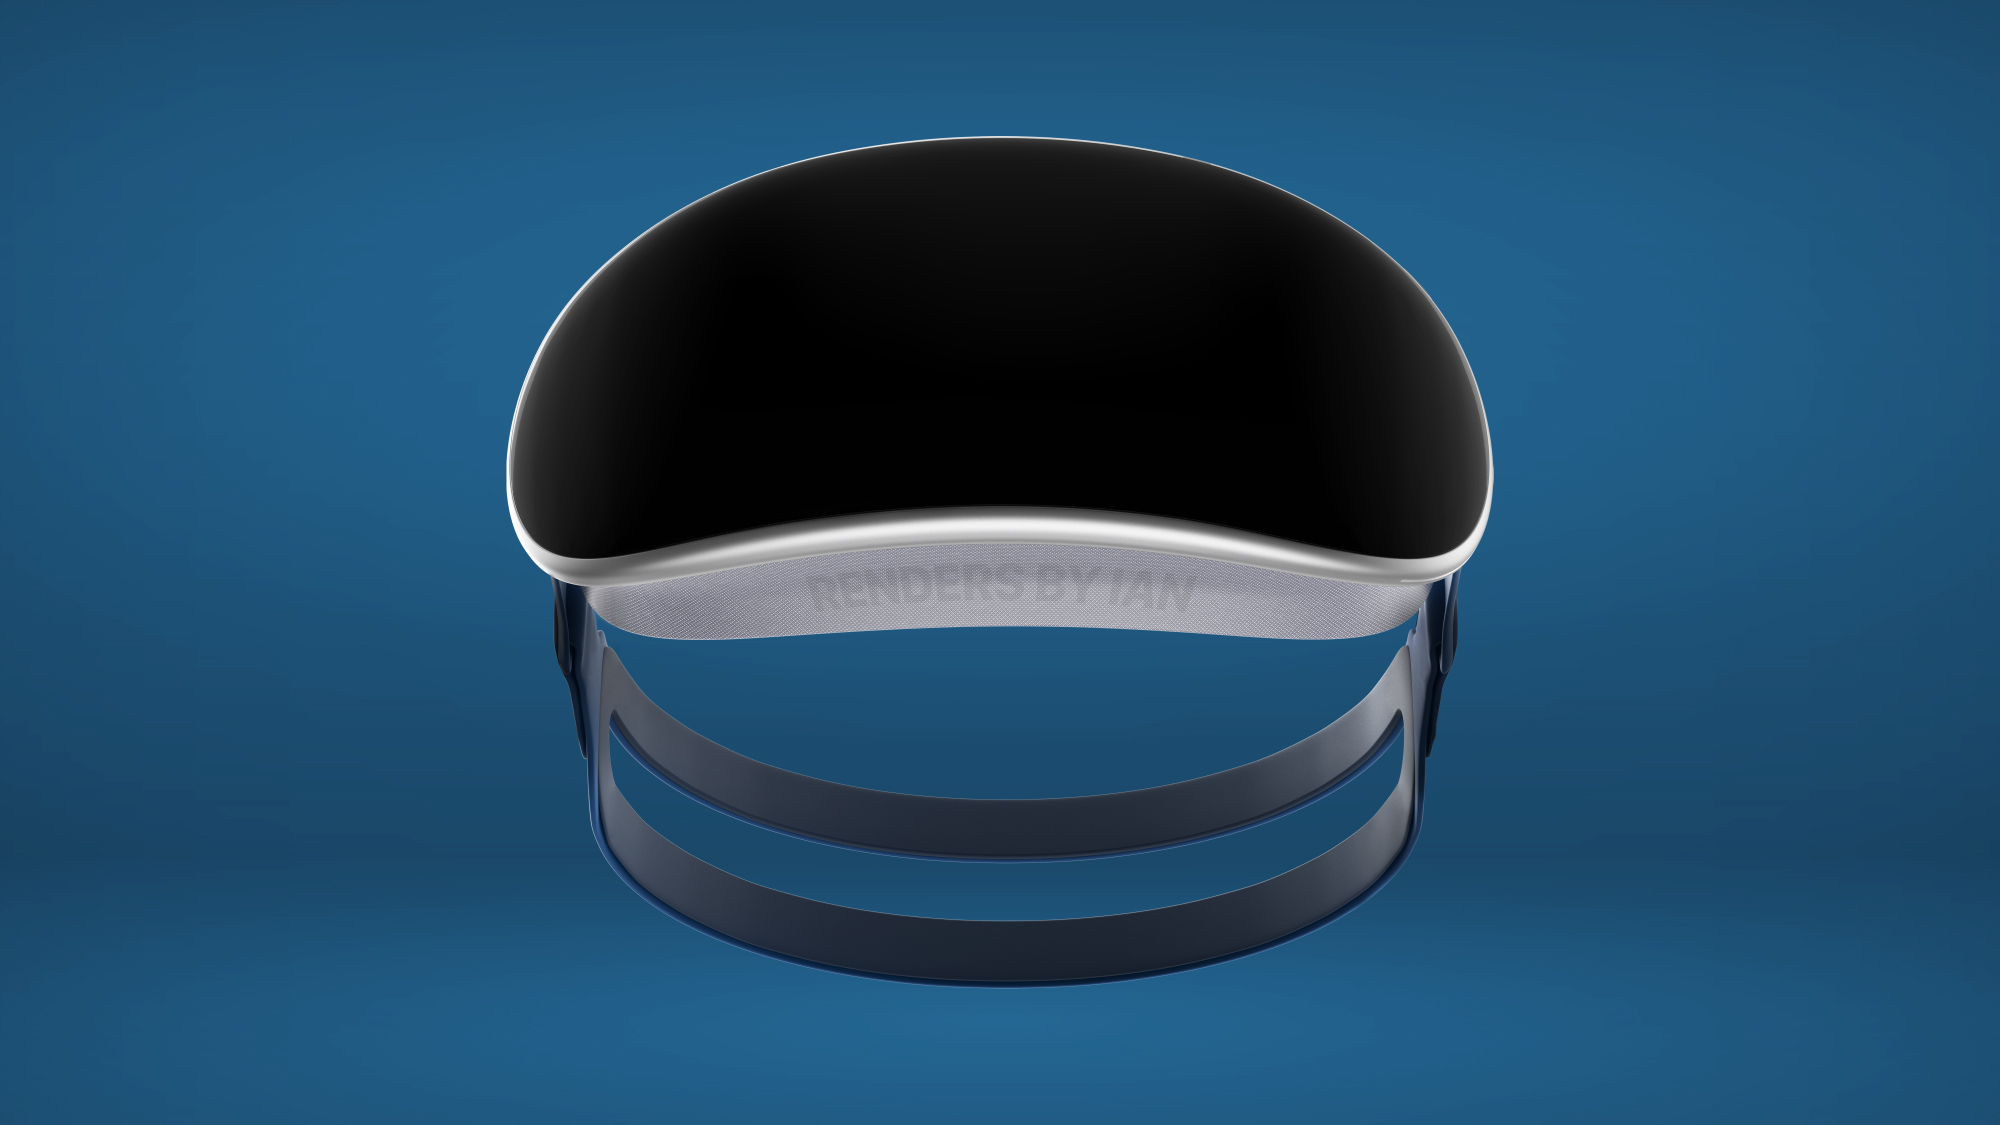 apple vr and mixed reality headset fan render front view on blue background